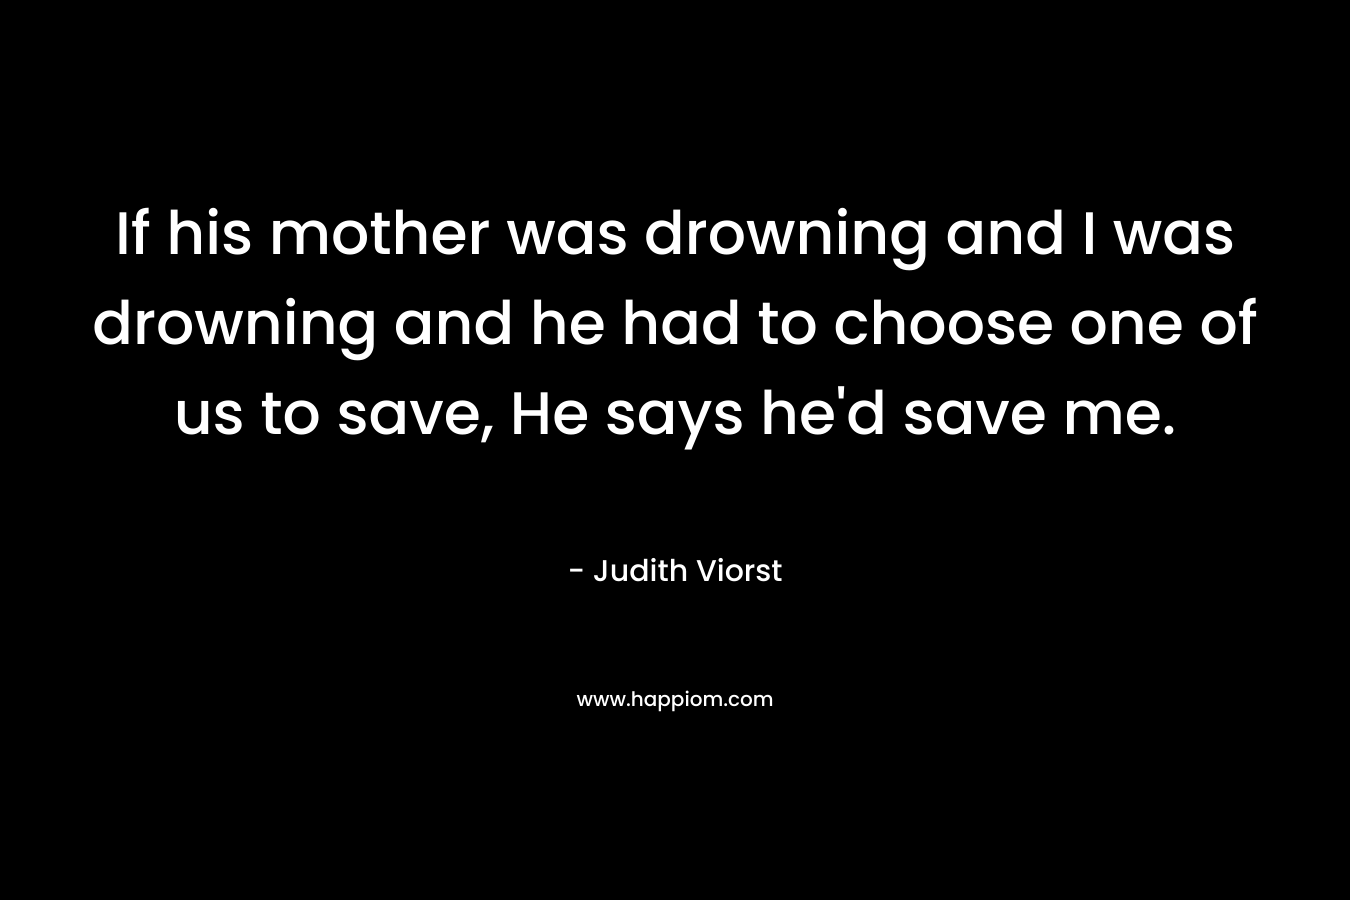 If his mother was drowning and I was drowning and he had to choose one of us to save, He says he'd save me.